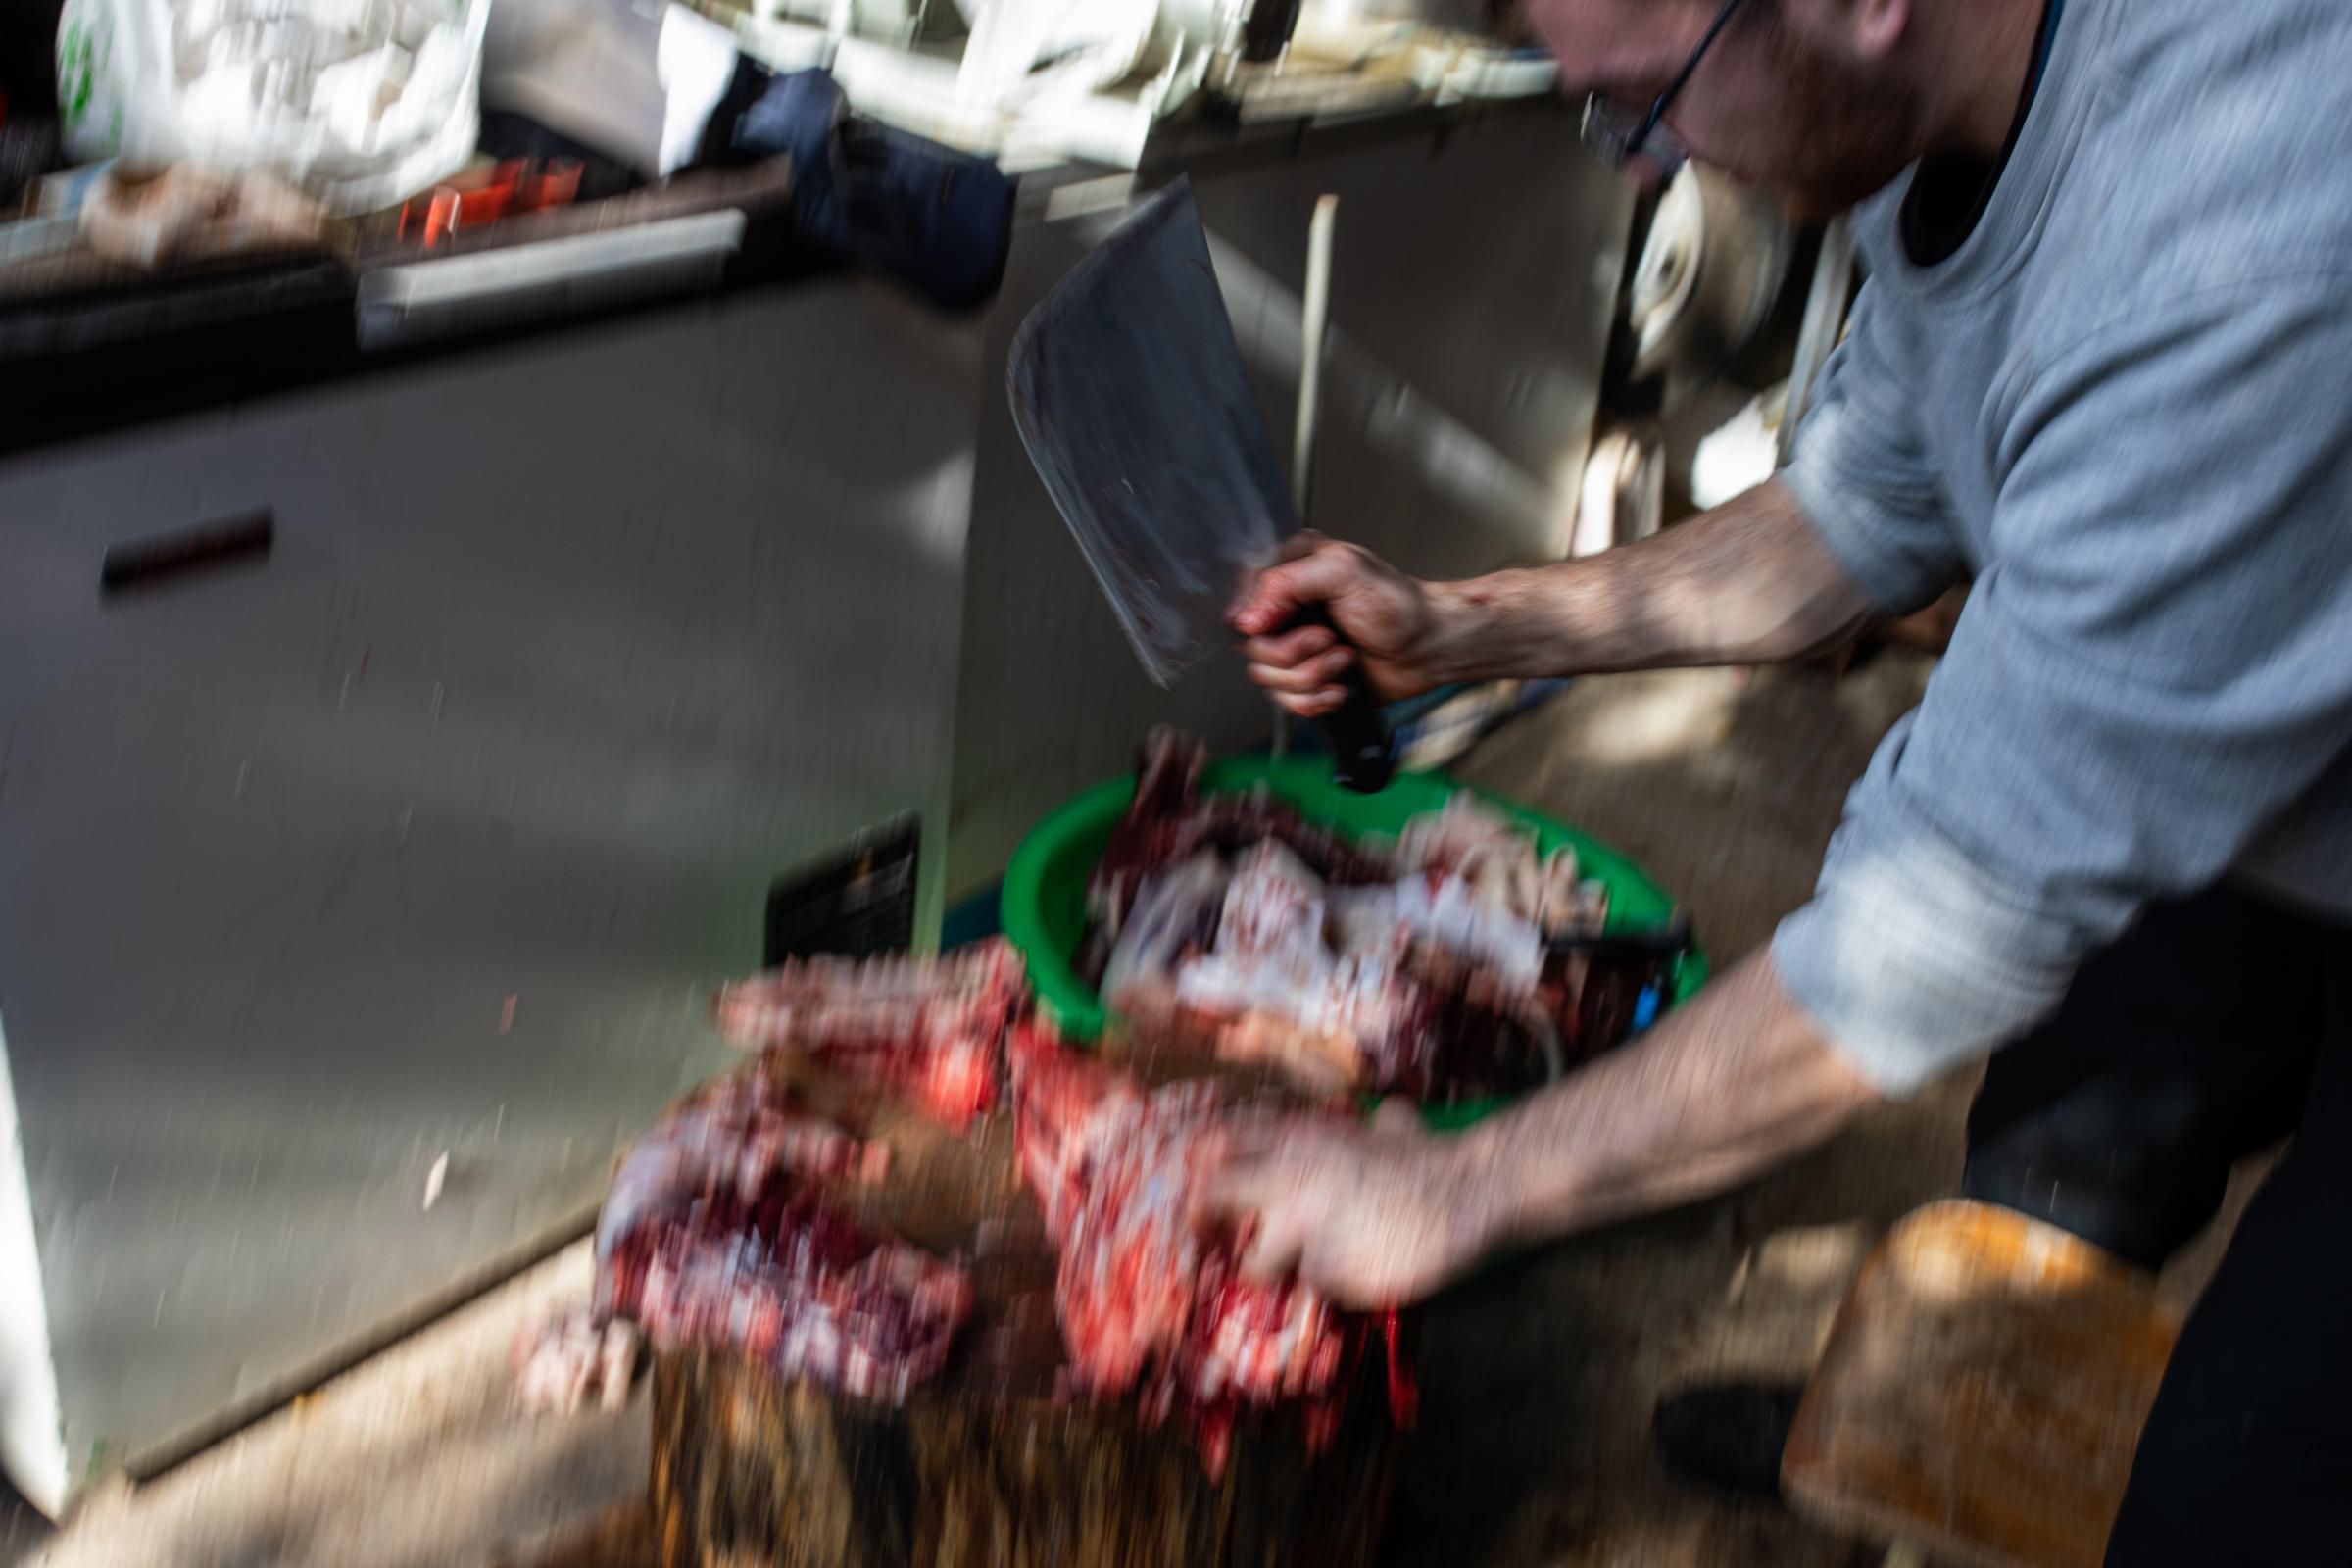 Spain's Sustainable Swine Slaughtering For Prized Iberian  - IBIZA, SPAIN - DECEMBER 06: A man cuts the pig's meat on...